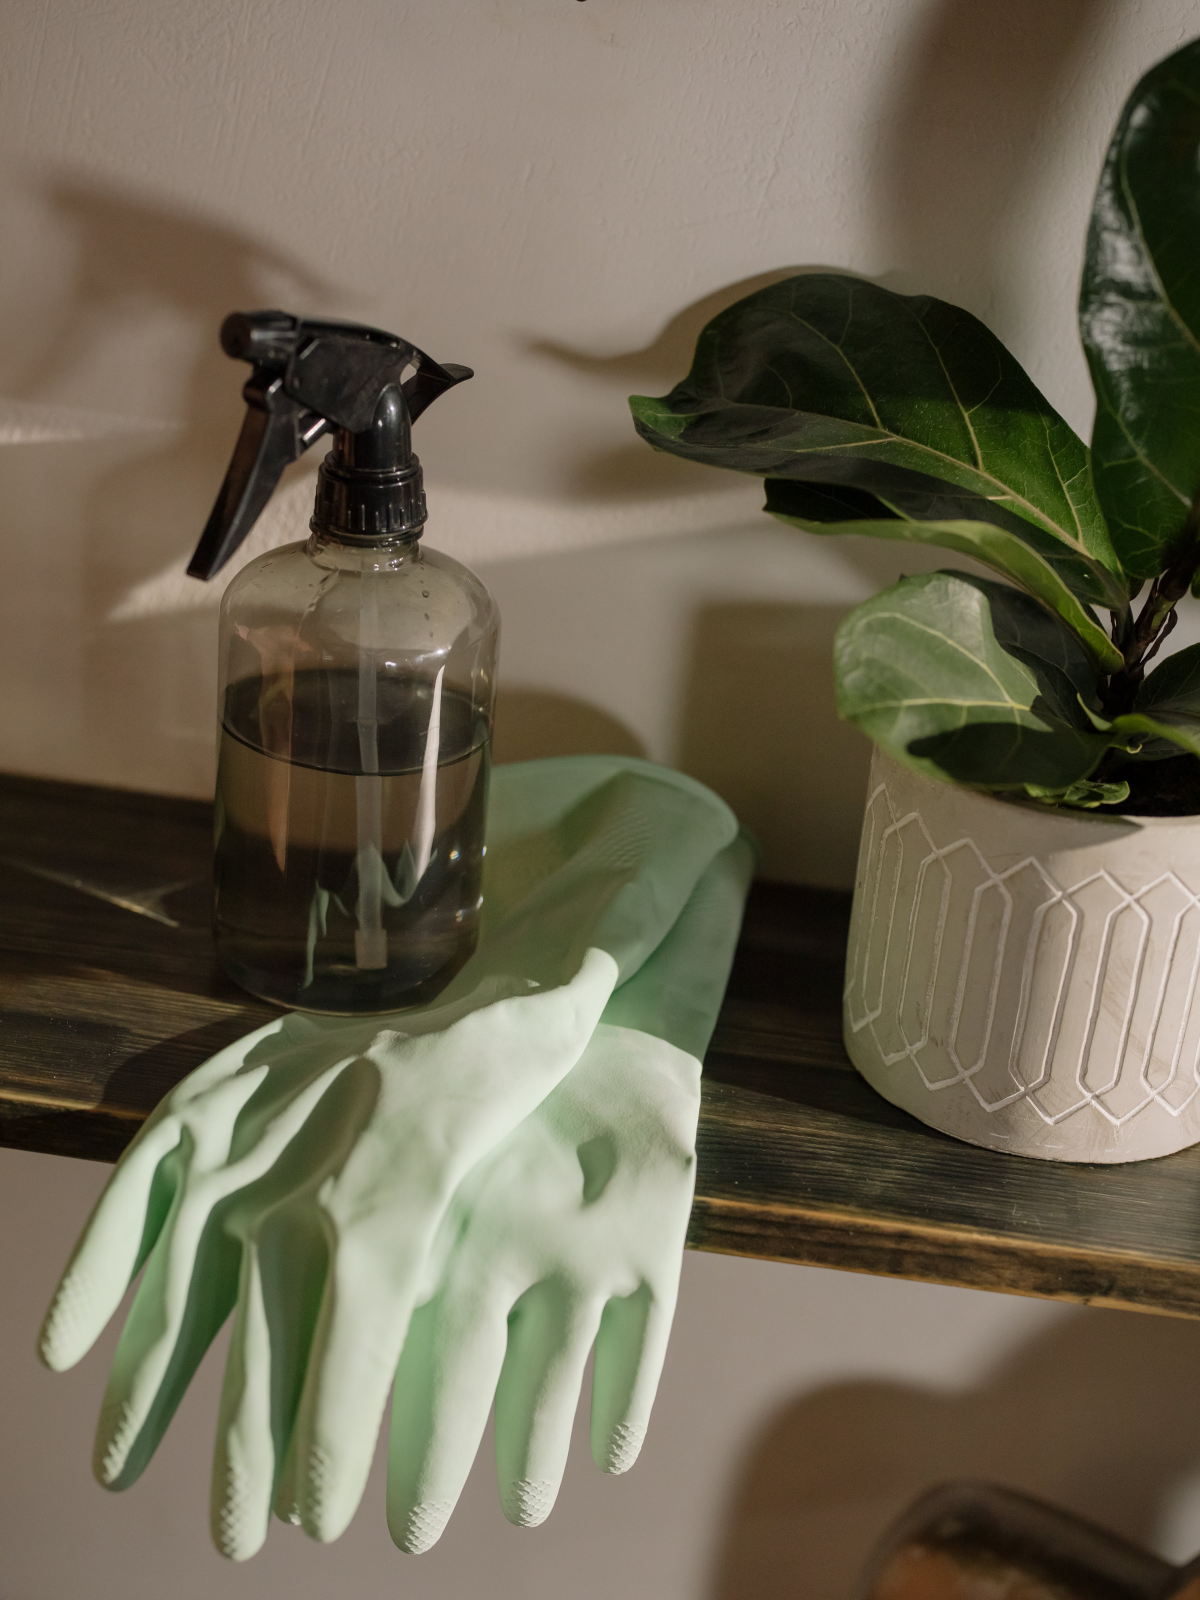 how to clean a coffee maker cleaning gloves and spray